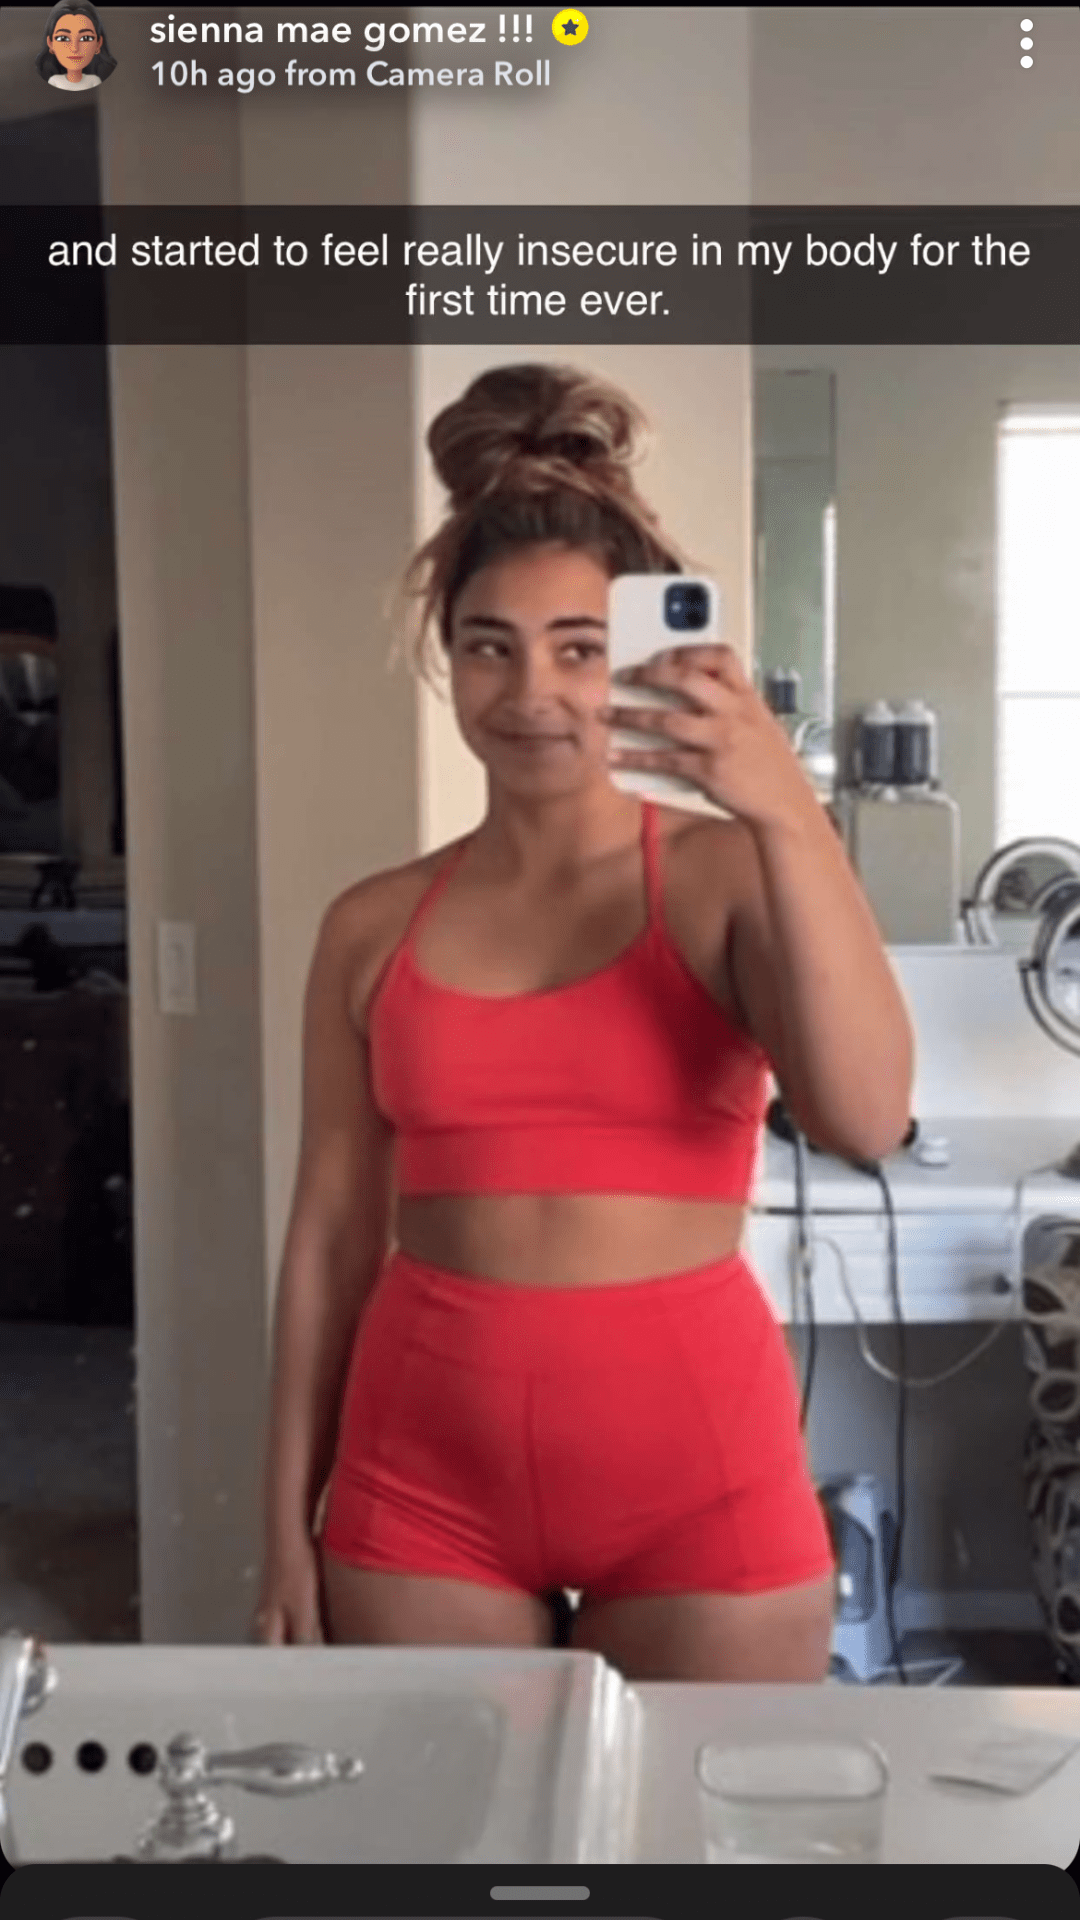 Sienna Mae poses in red two piece workout set; girl in mirror selfie taking photo wearing red two piece workout set